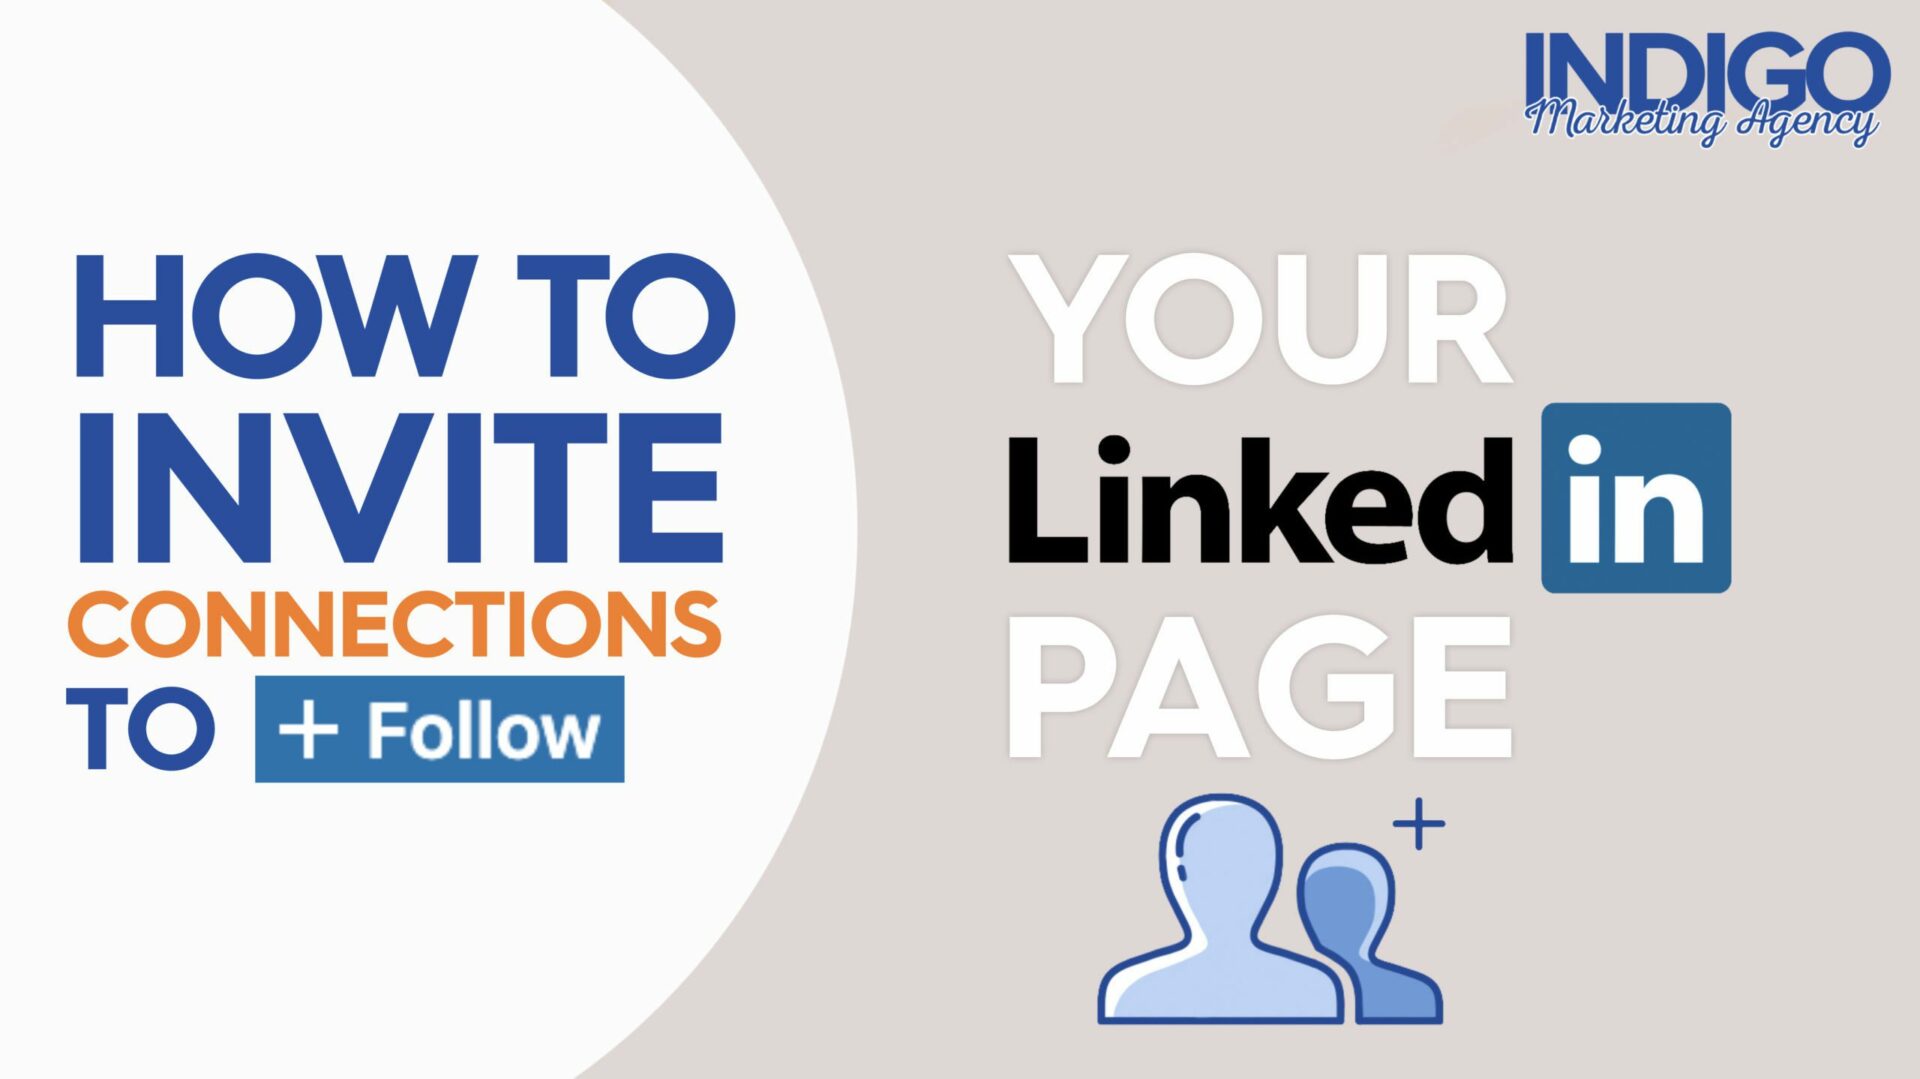 How to invite Connections to Follow your LinkedIn